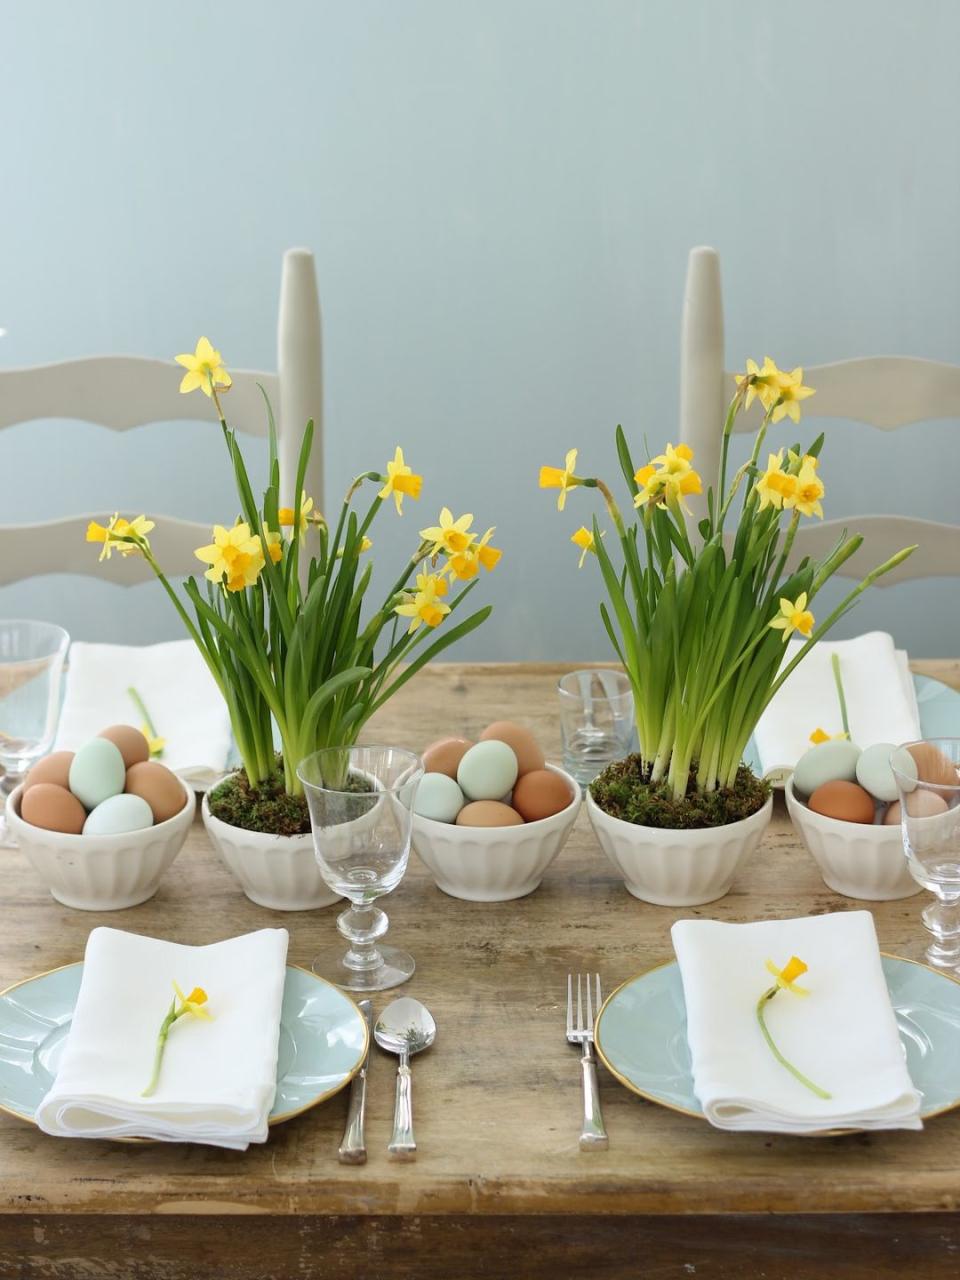 Daffodils and Easter Eggs